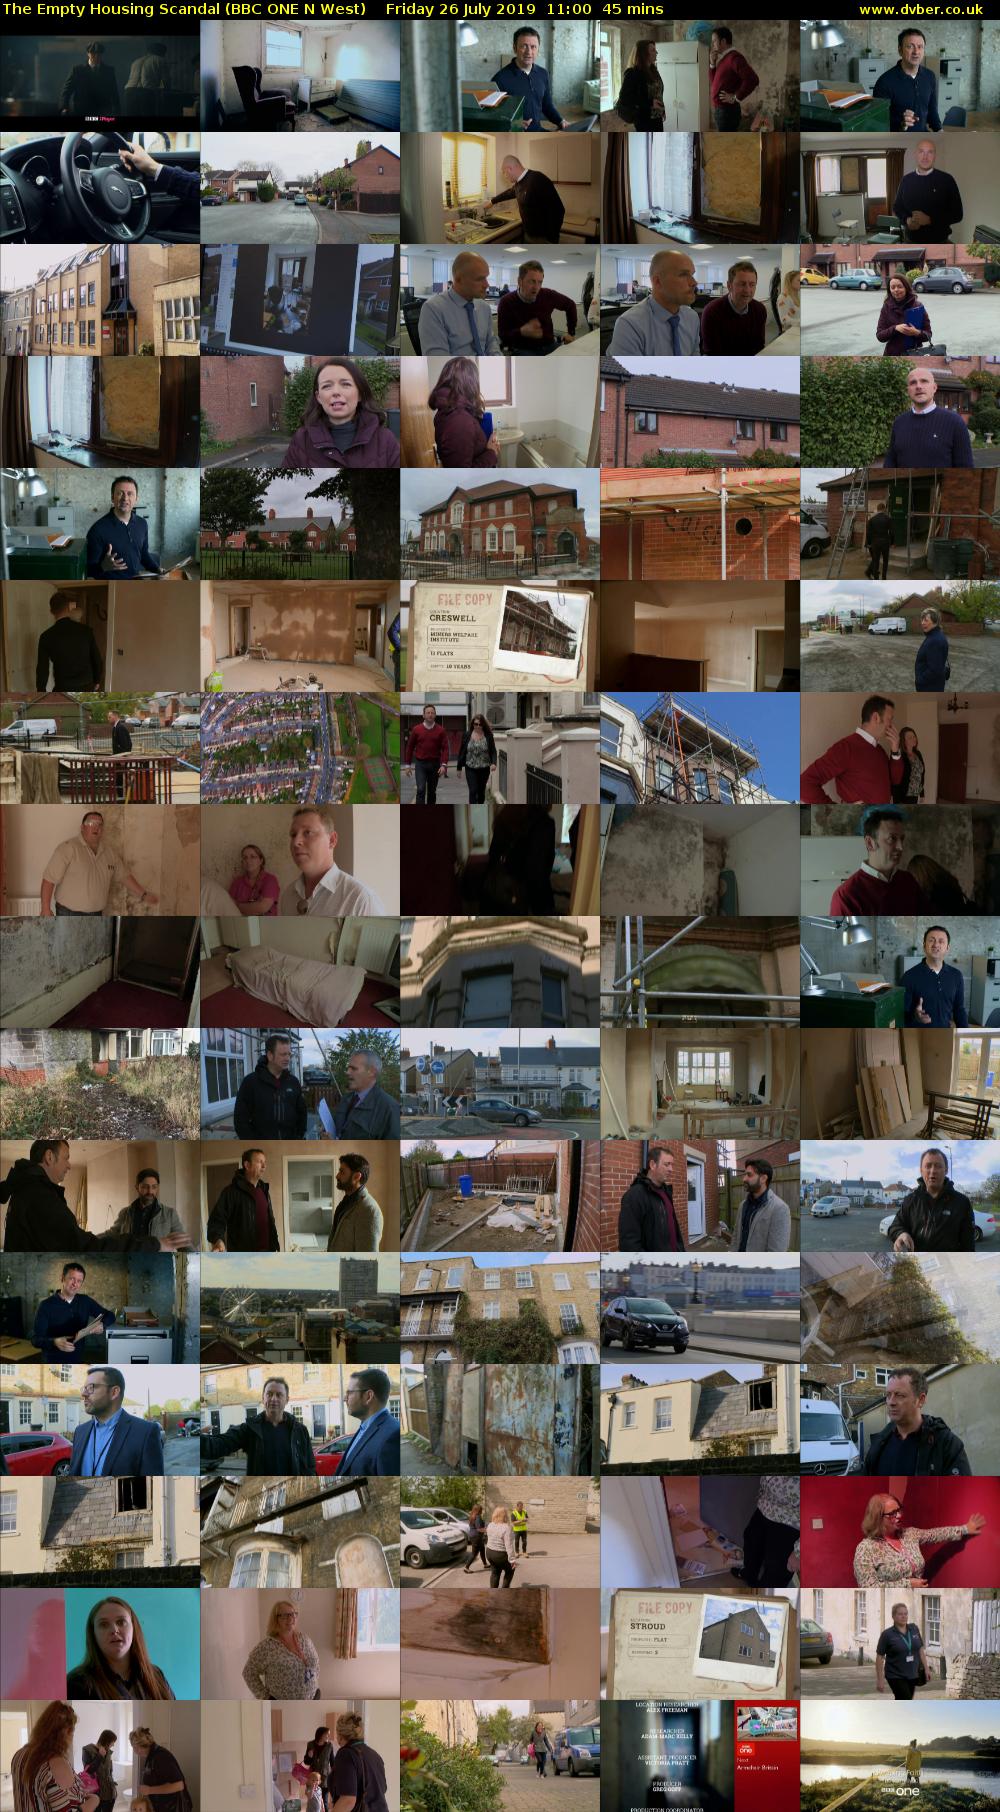 The Empty Housing Scandal (BBC ONE N West) Friday 26 July 2019 11:00 - 11:45